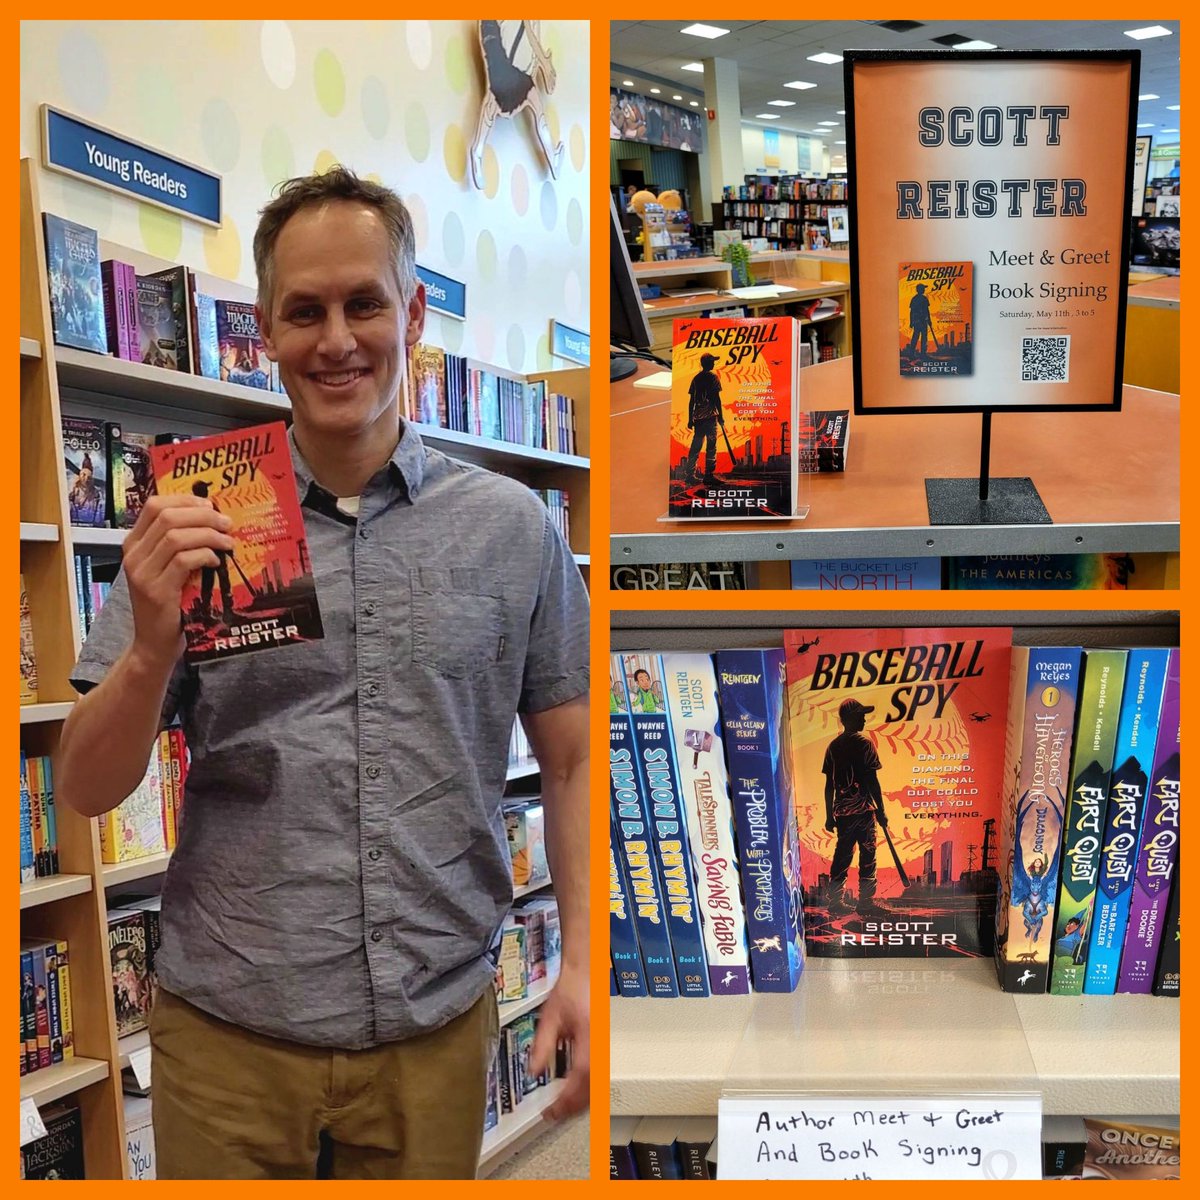 Congrats to Scott Reister on the publication of his first book! He'll be here on Saturday, May 11th at 3pm for a short presentation and a book signing. Call ahead to reserve your spot and your book.

stores.barnesandnoble.com/event/97800621…

#kidsbookstagram #booksigning #DesMoines